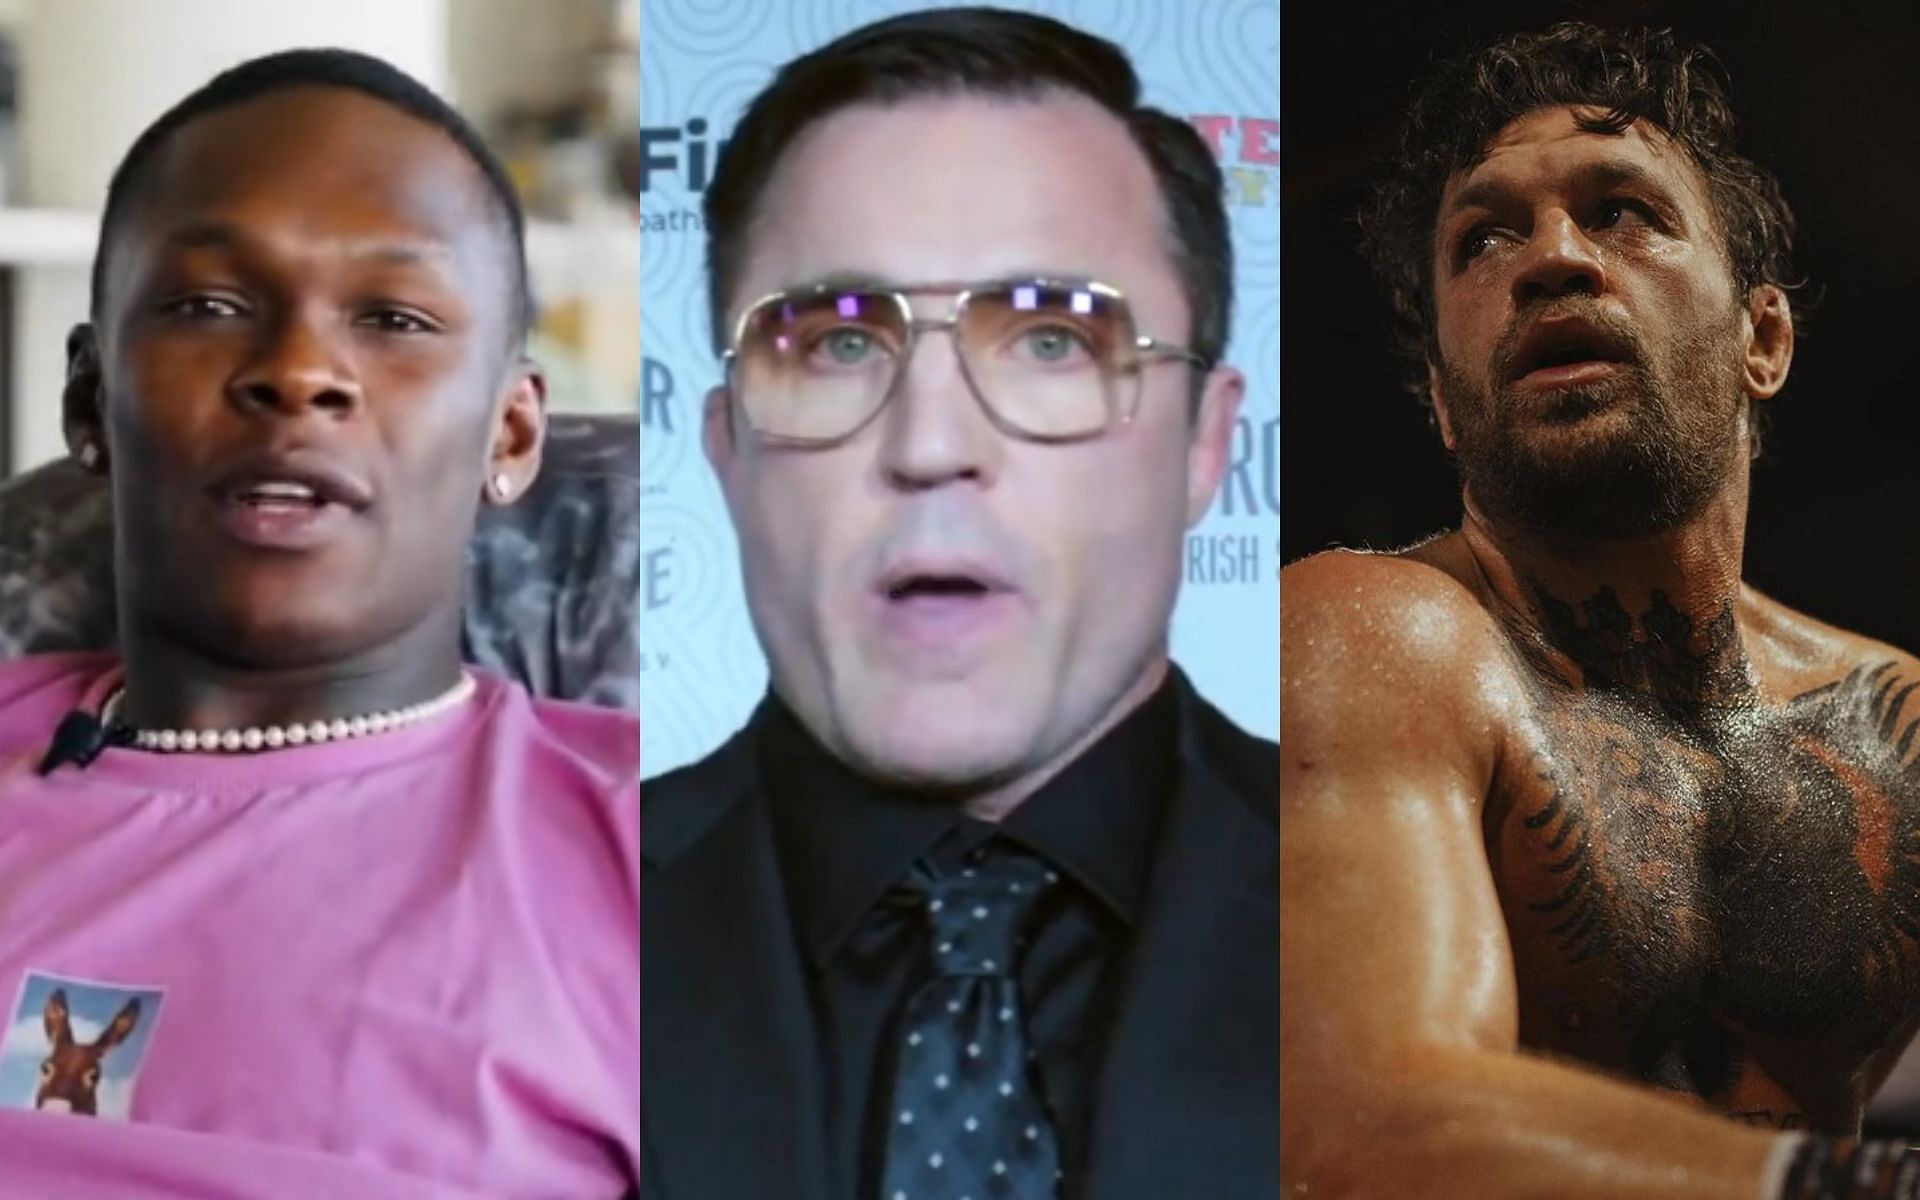 Chael Sonnen [Middle] believes that Israel Adesanya [Left] will headline UFC 300 instead of Conor McGregor [Right] [Image courtesy: @stylebender, @MMAJunkie, and @TheNotoriousMMA - X]